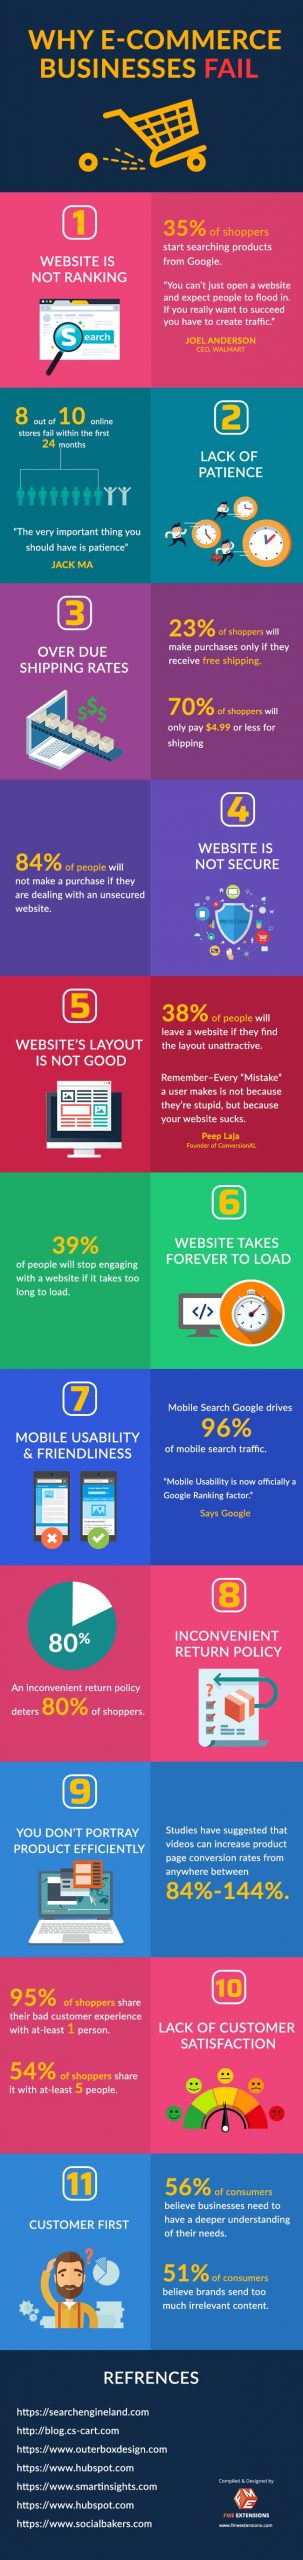 , 11 eCommerce Website Mistakes that Drive Shoppers Crazy and Reduce Sales [Infographic], TornCRM